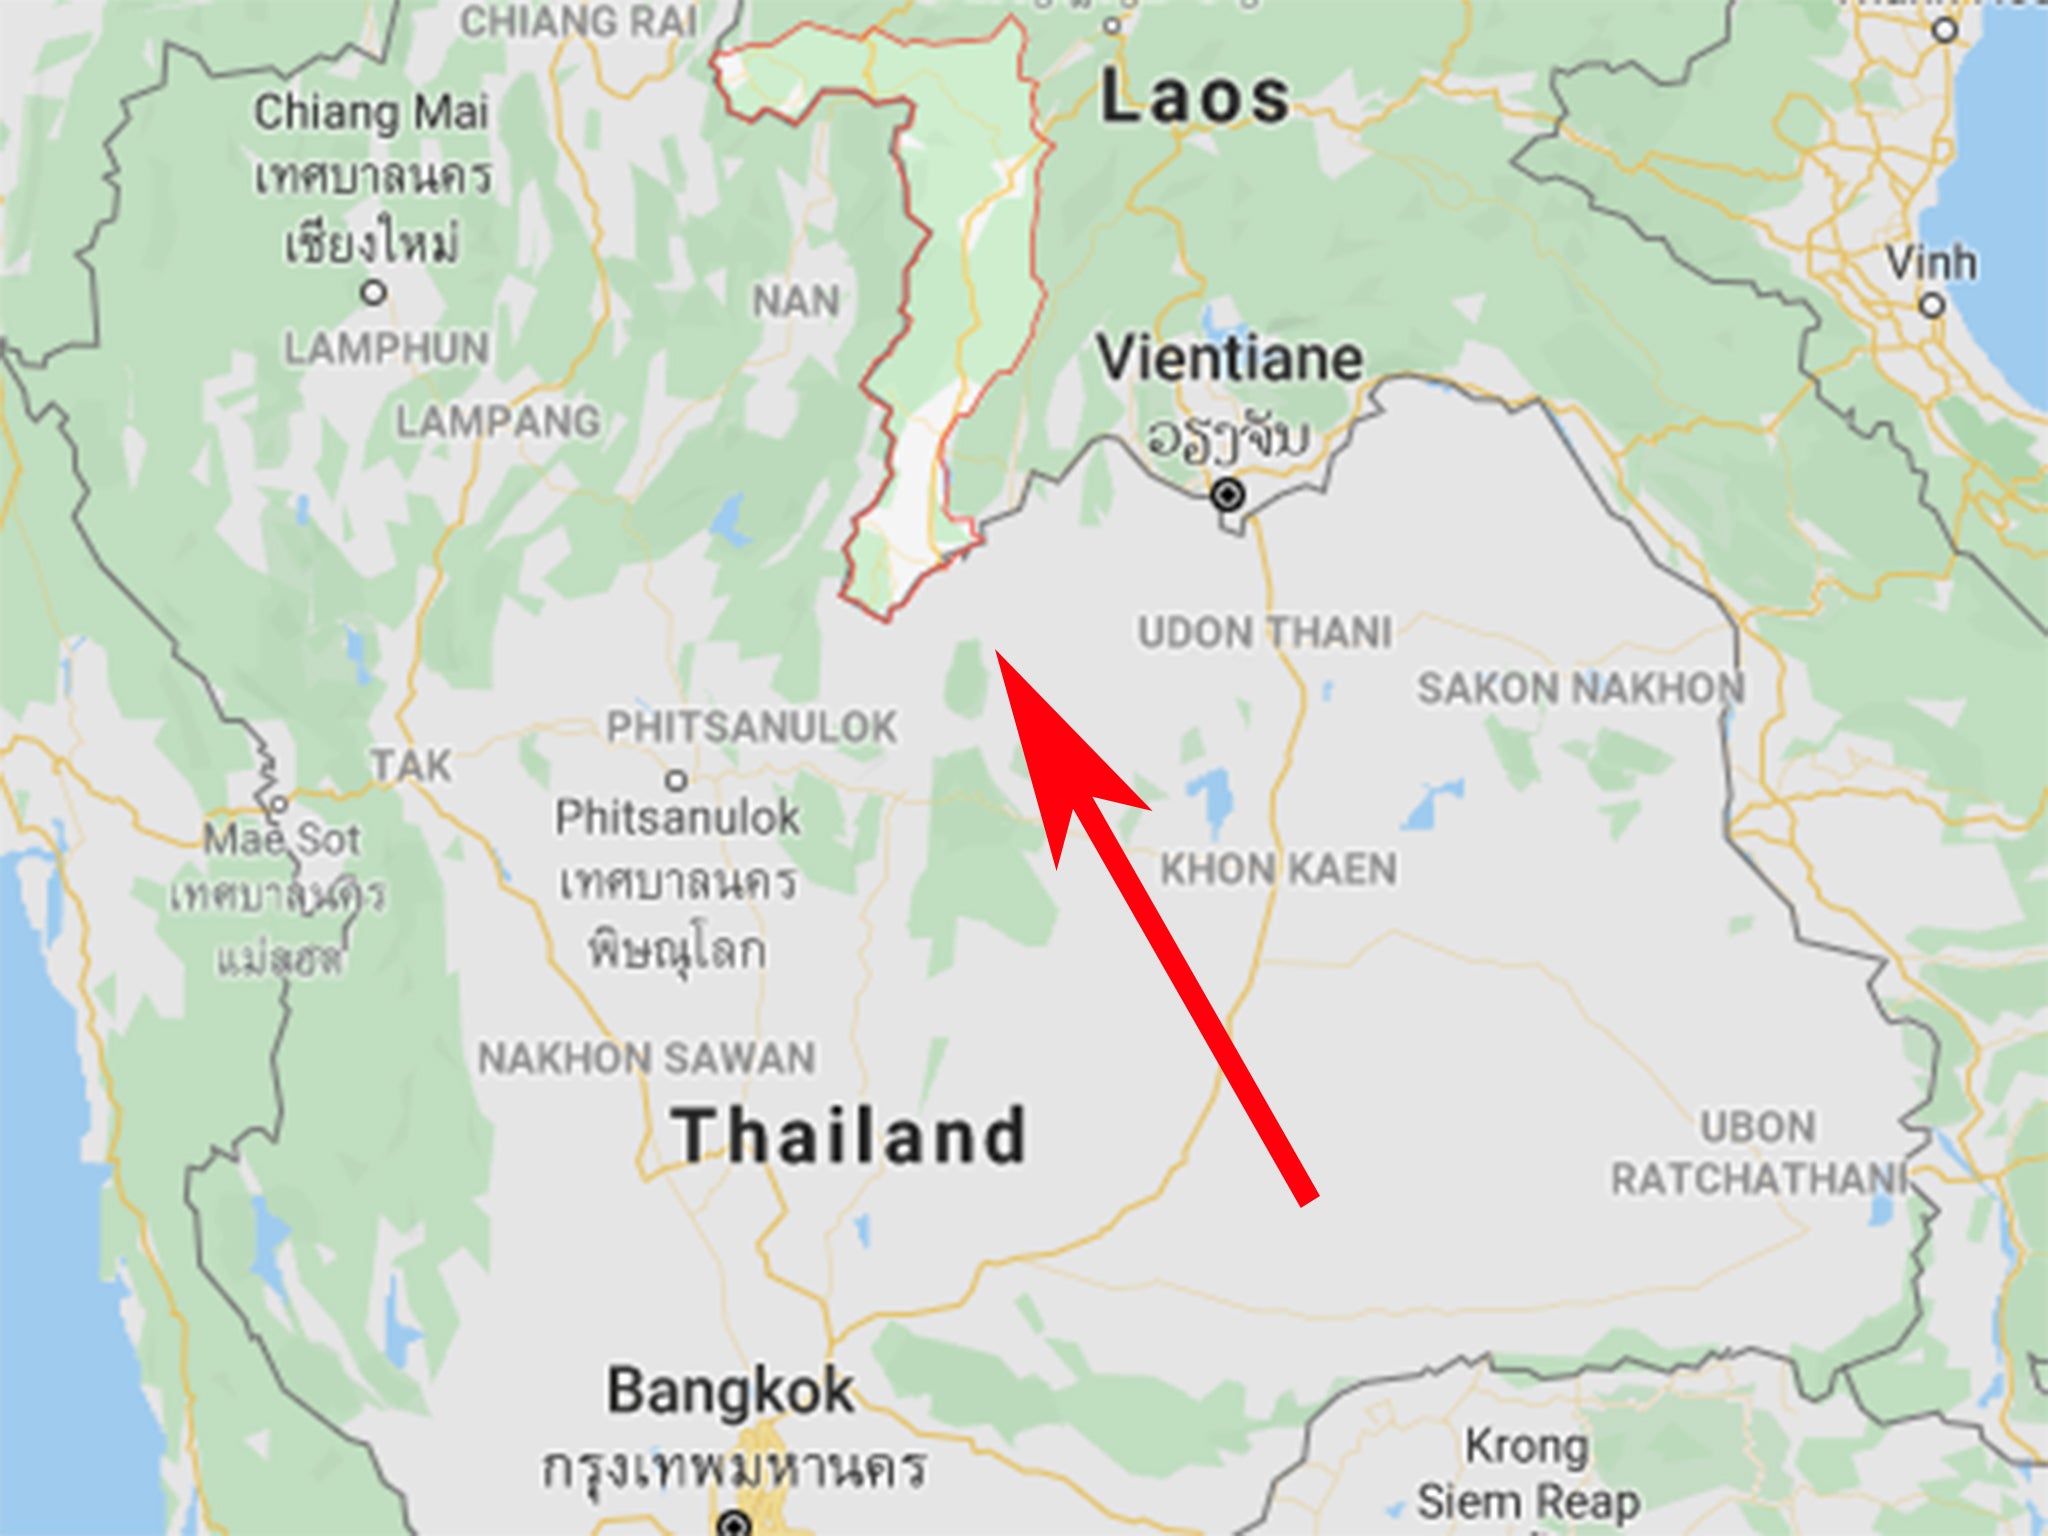 The epicentre was just inside Sainyabuli province in Laos, near northern Thailand